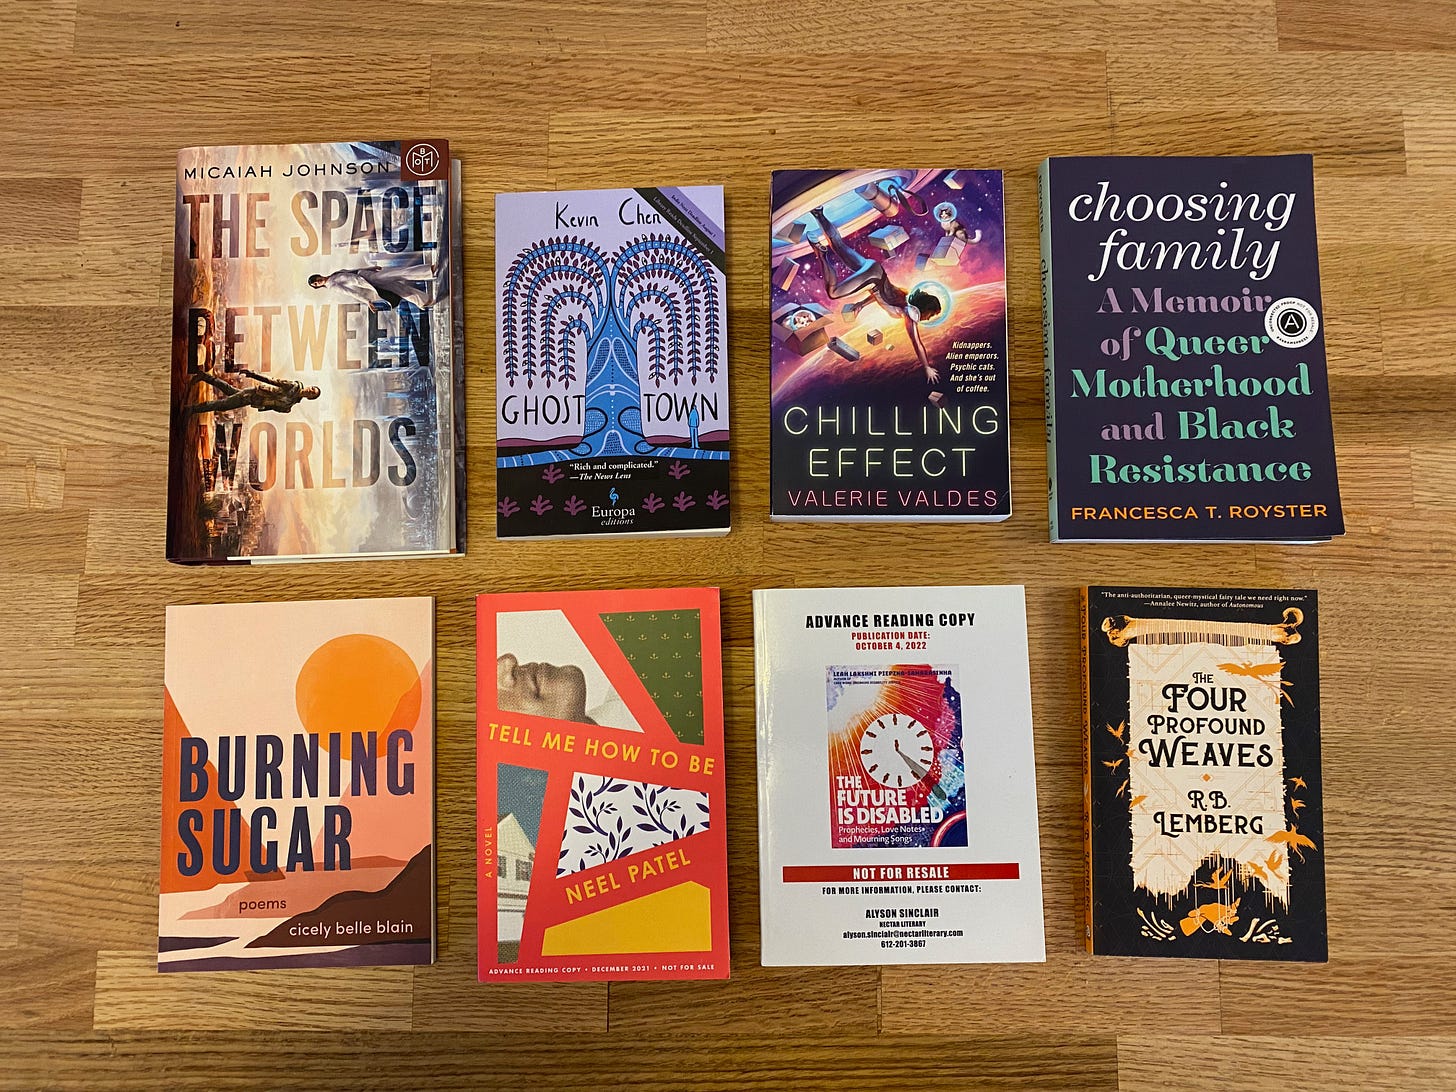 The eight listed books laid out in two rows of four on a wooden counter.